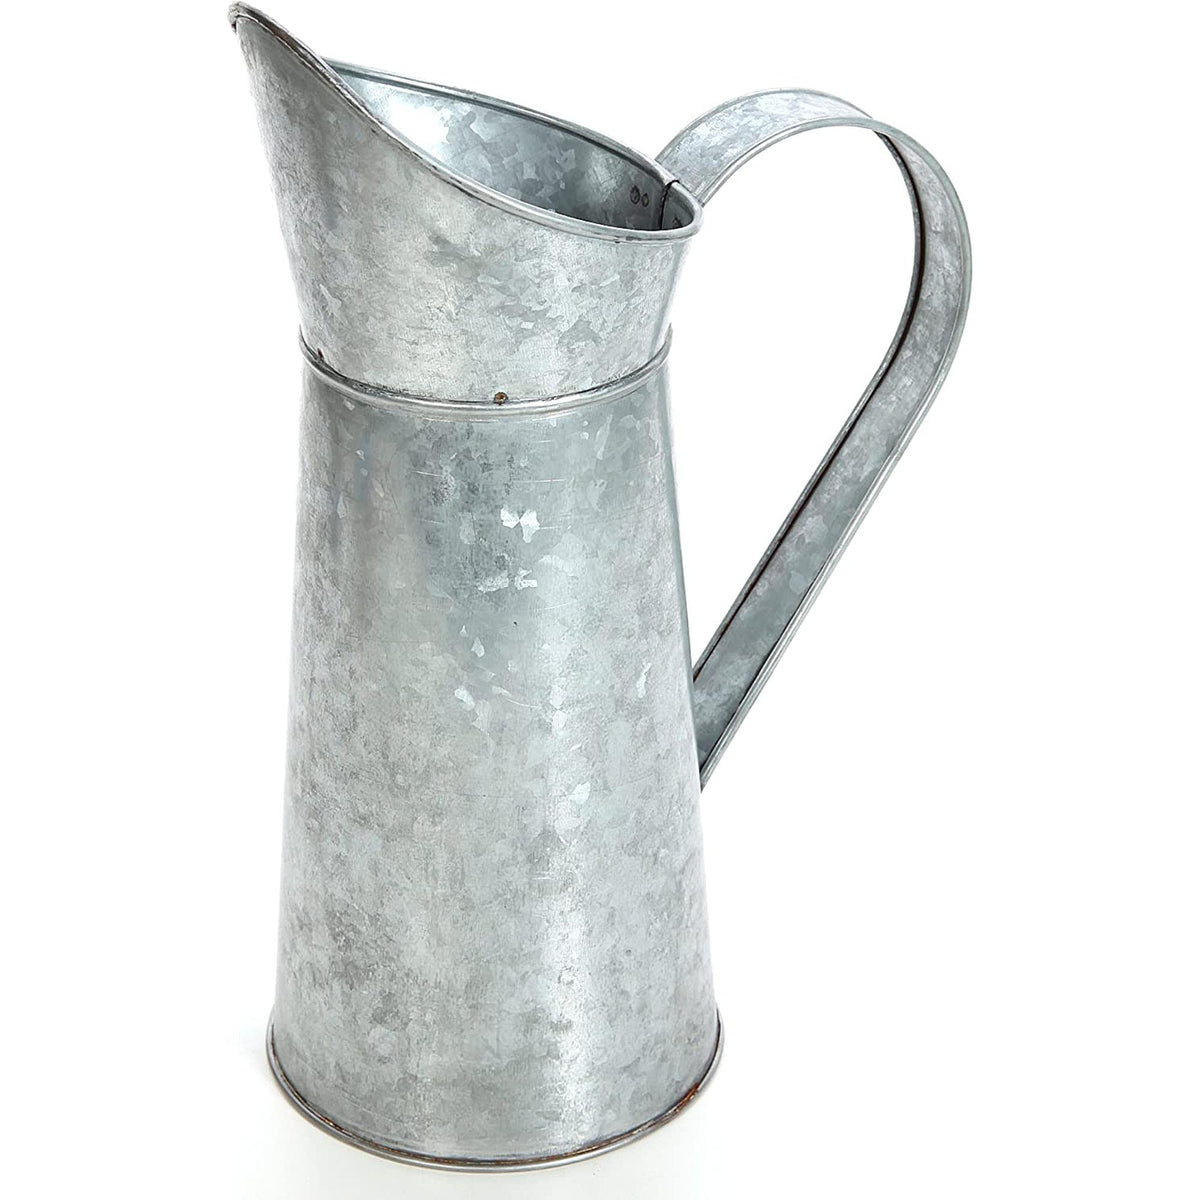 HOSLEY® Iron Galvanized Pitcher , 14 inches High